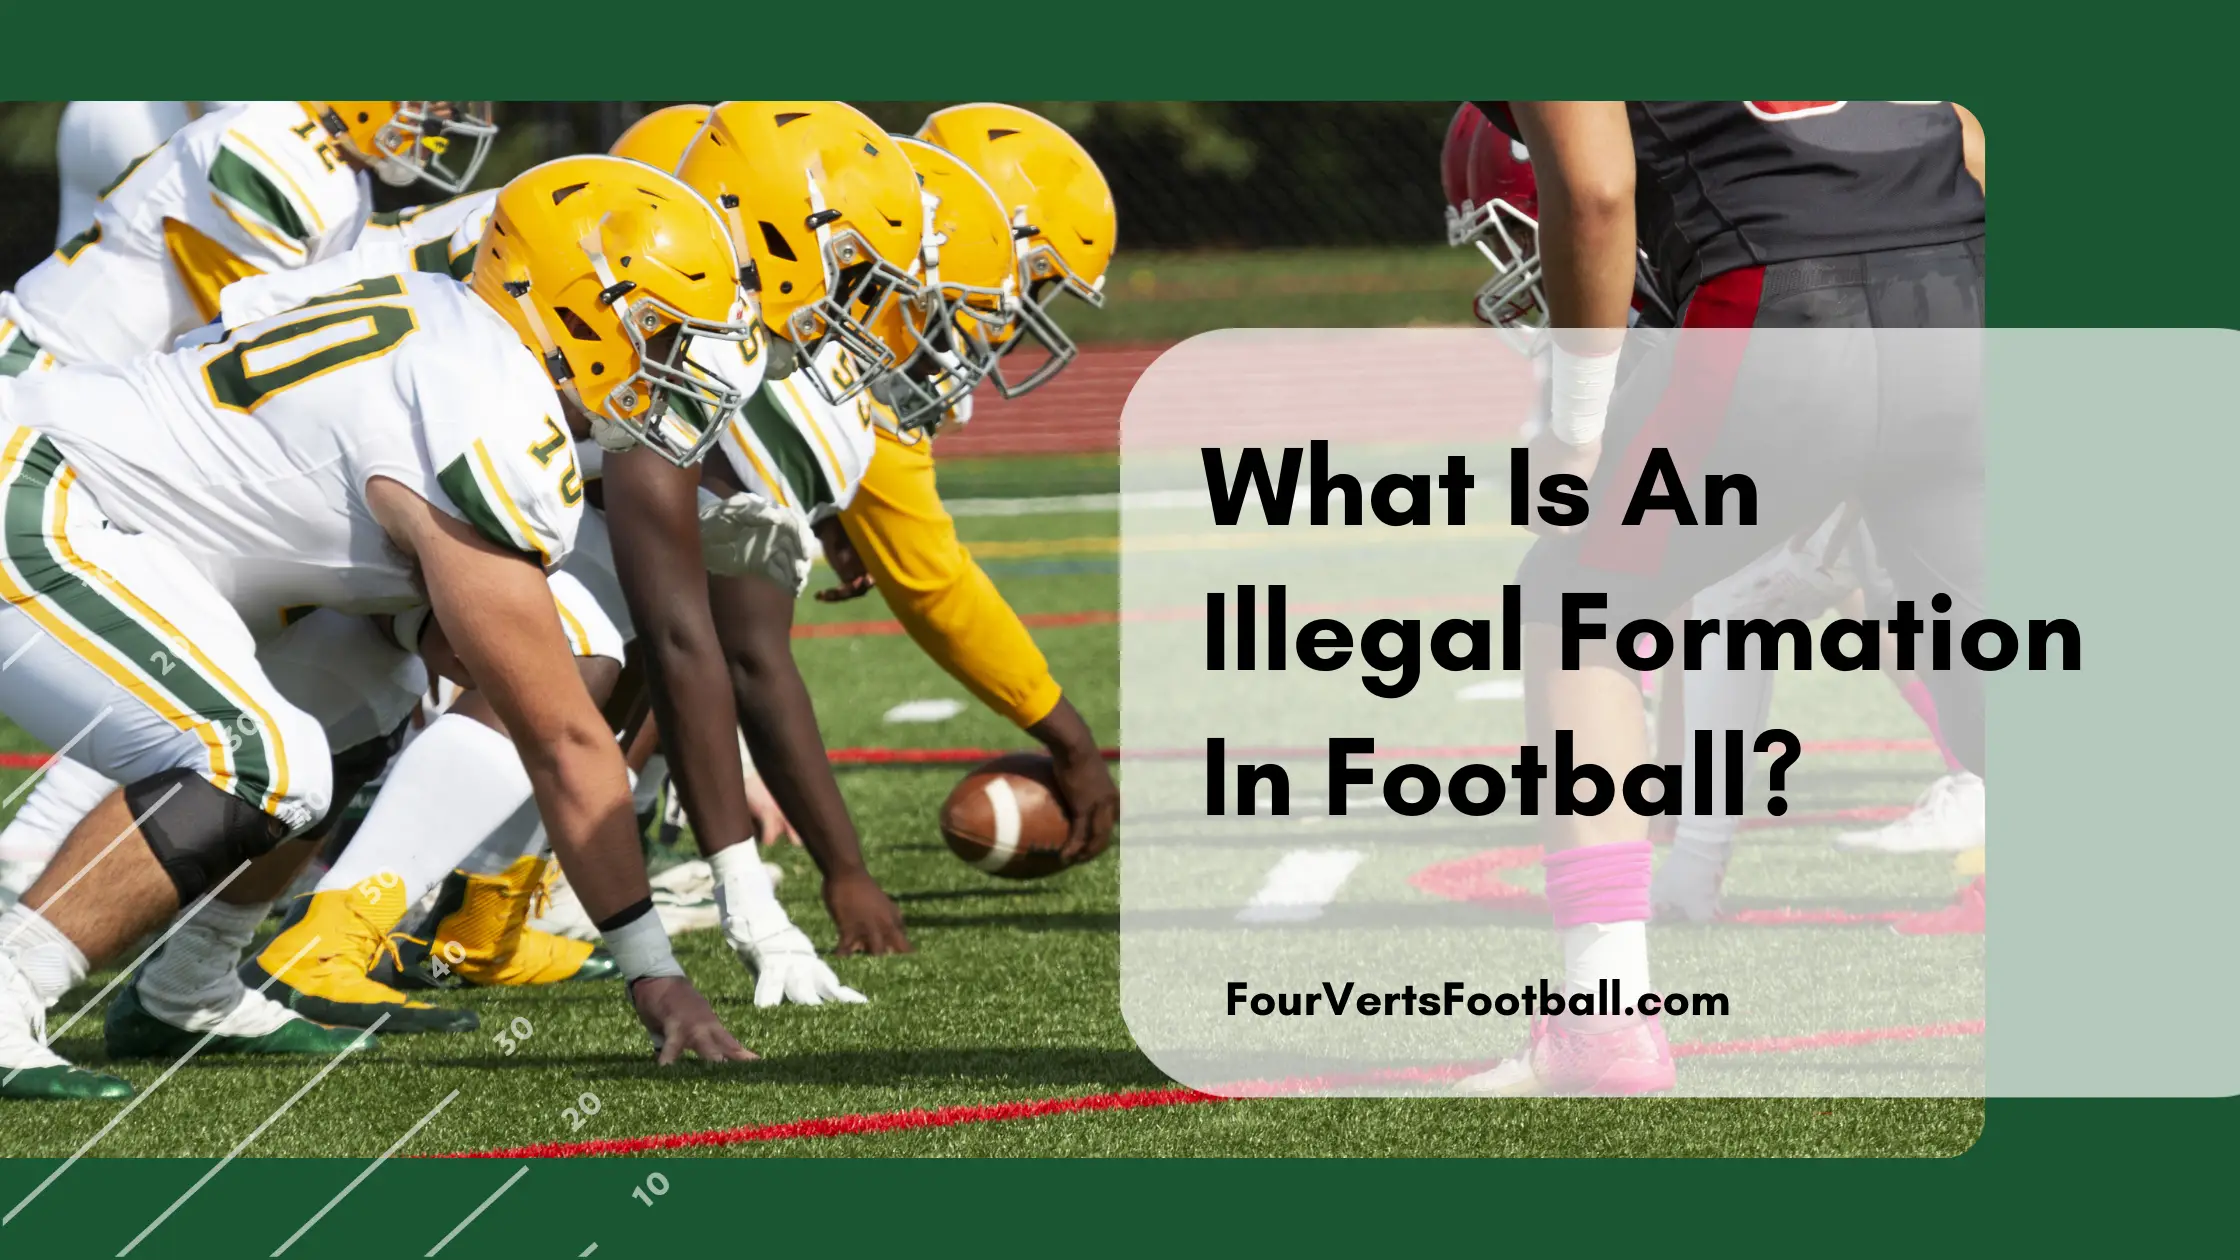 What Is An Illegal Formation In Football